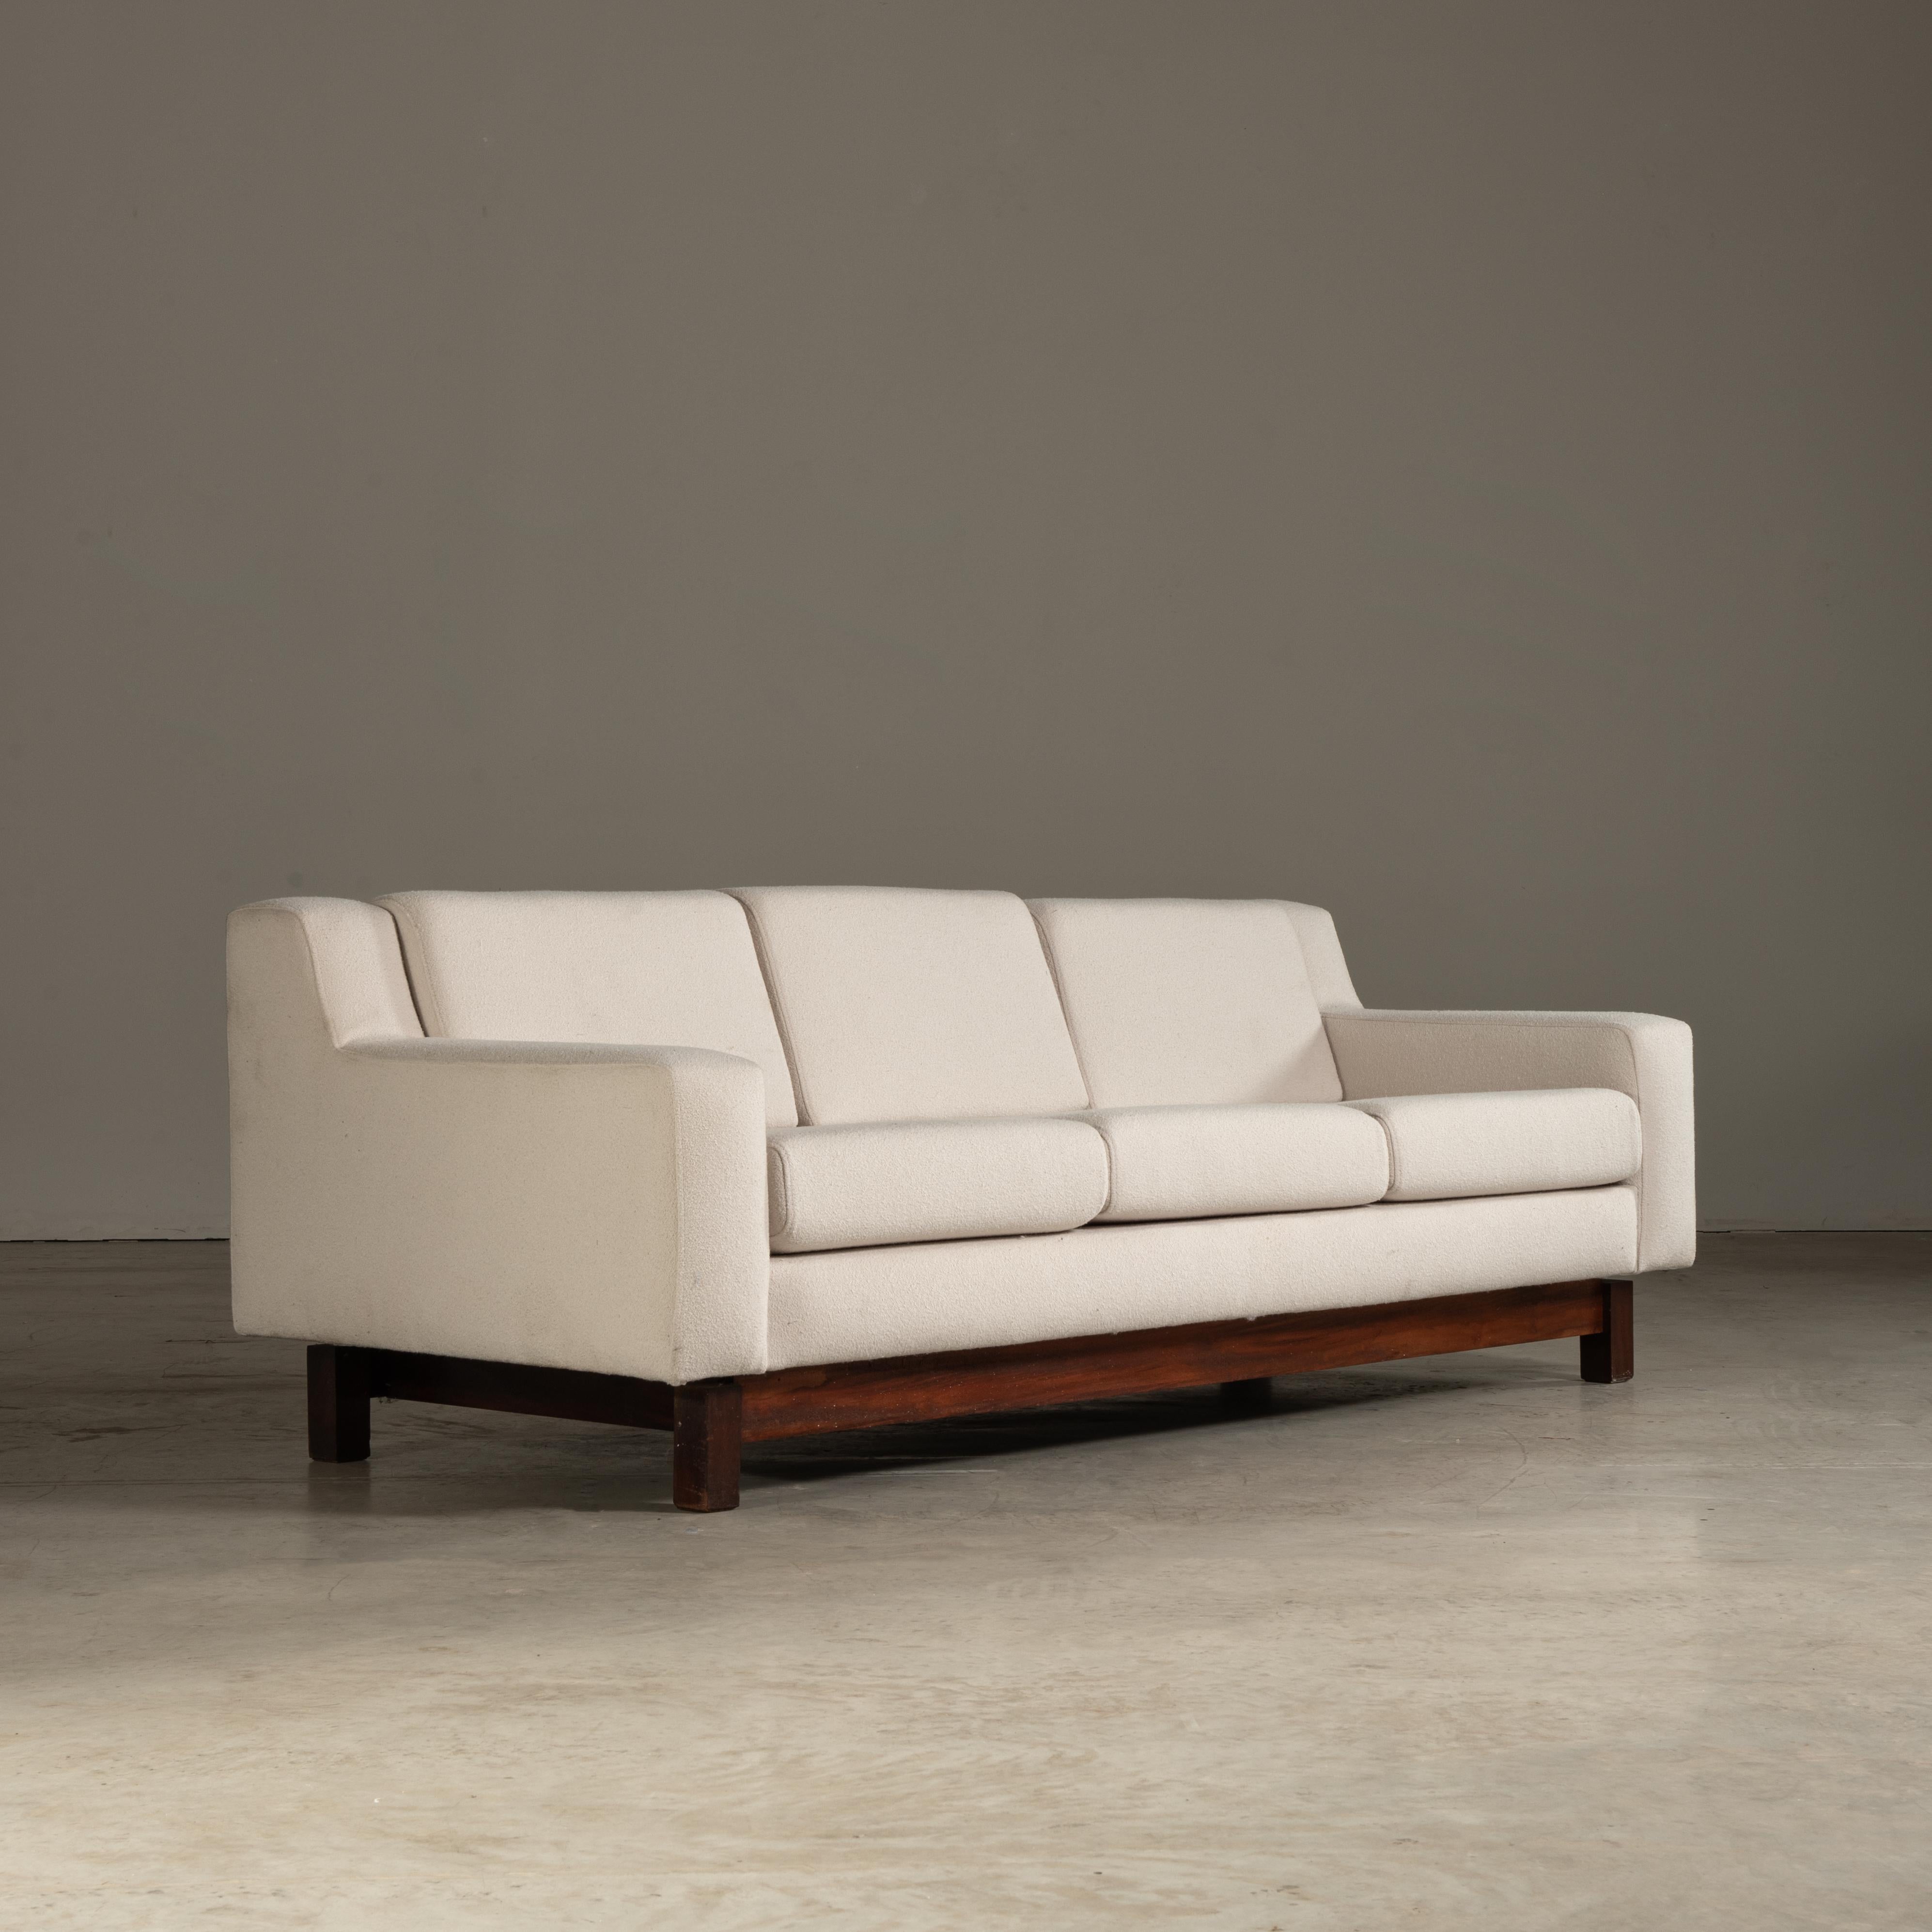 This sofa, designed by Sérgio Rodrigues, is an exquisite piece of mid-century modern furniture that embodies the distinctive character of Brazilian design. Crafted from the robust tropical wood, it is both a tribute to the country's rich material